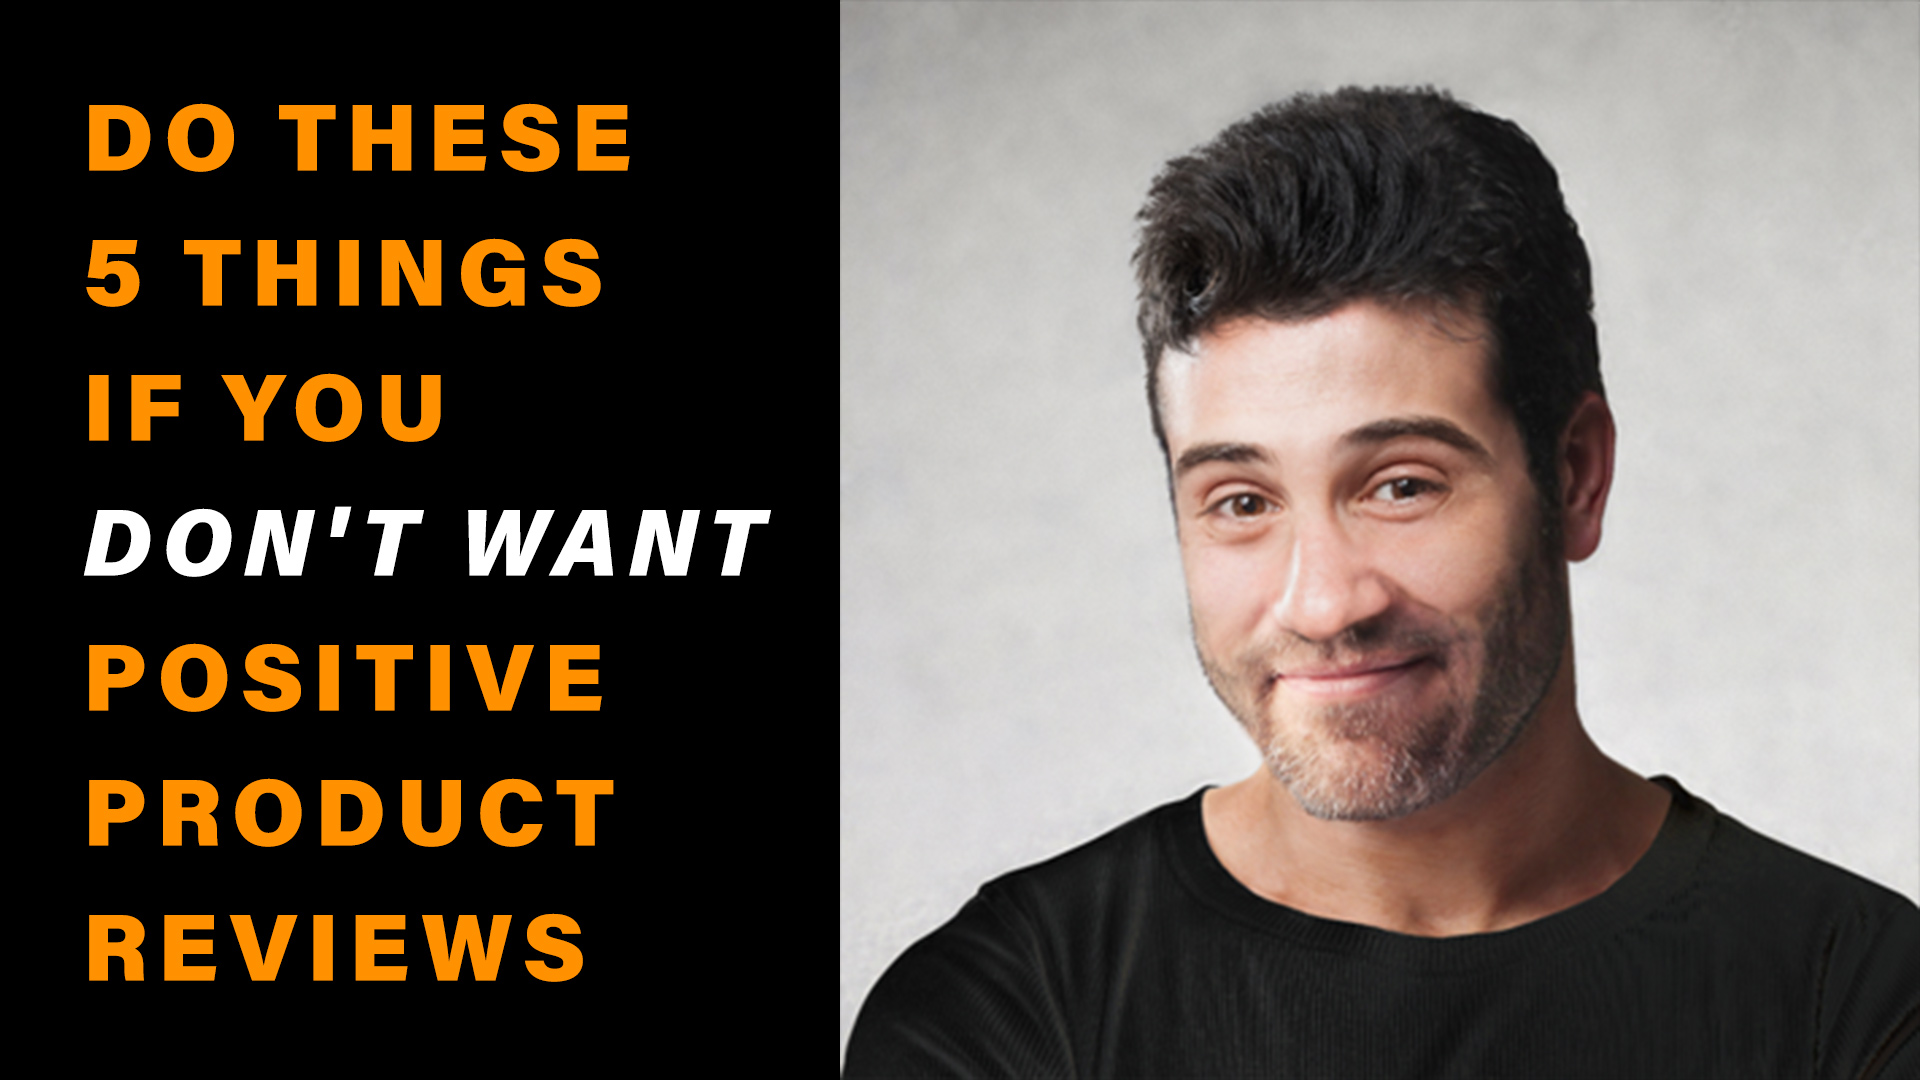 Do These 5 Things If You DON'T WANT Positive Product Reviews